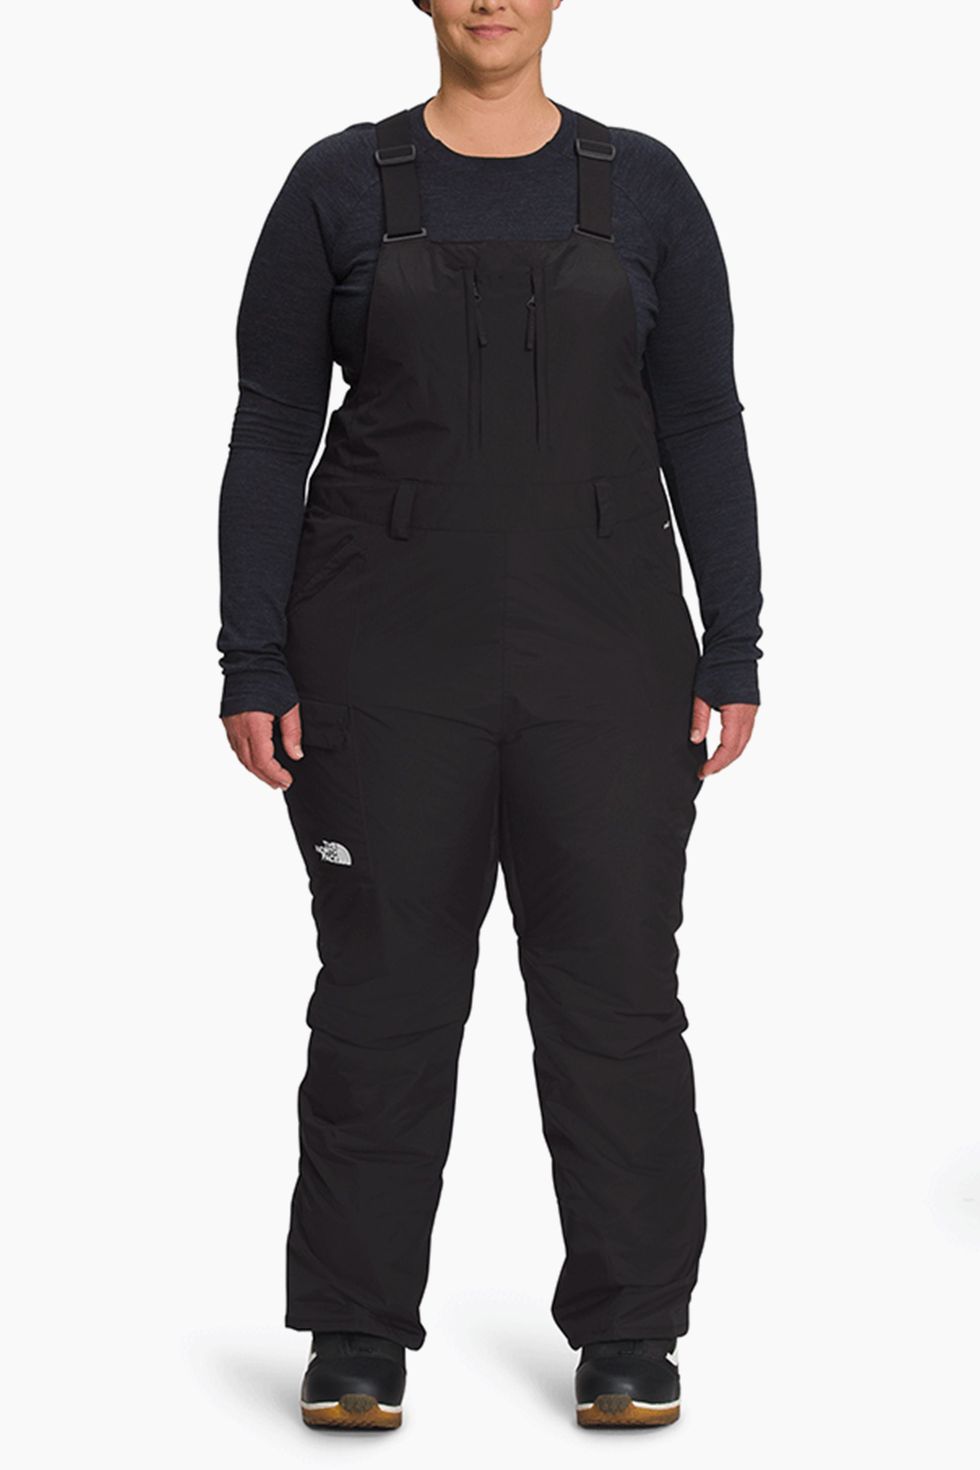 The North Face Snow Pants  Best Price Guarantee at DICK'S